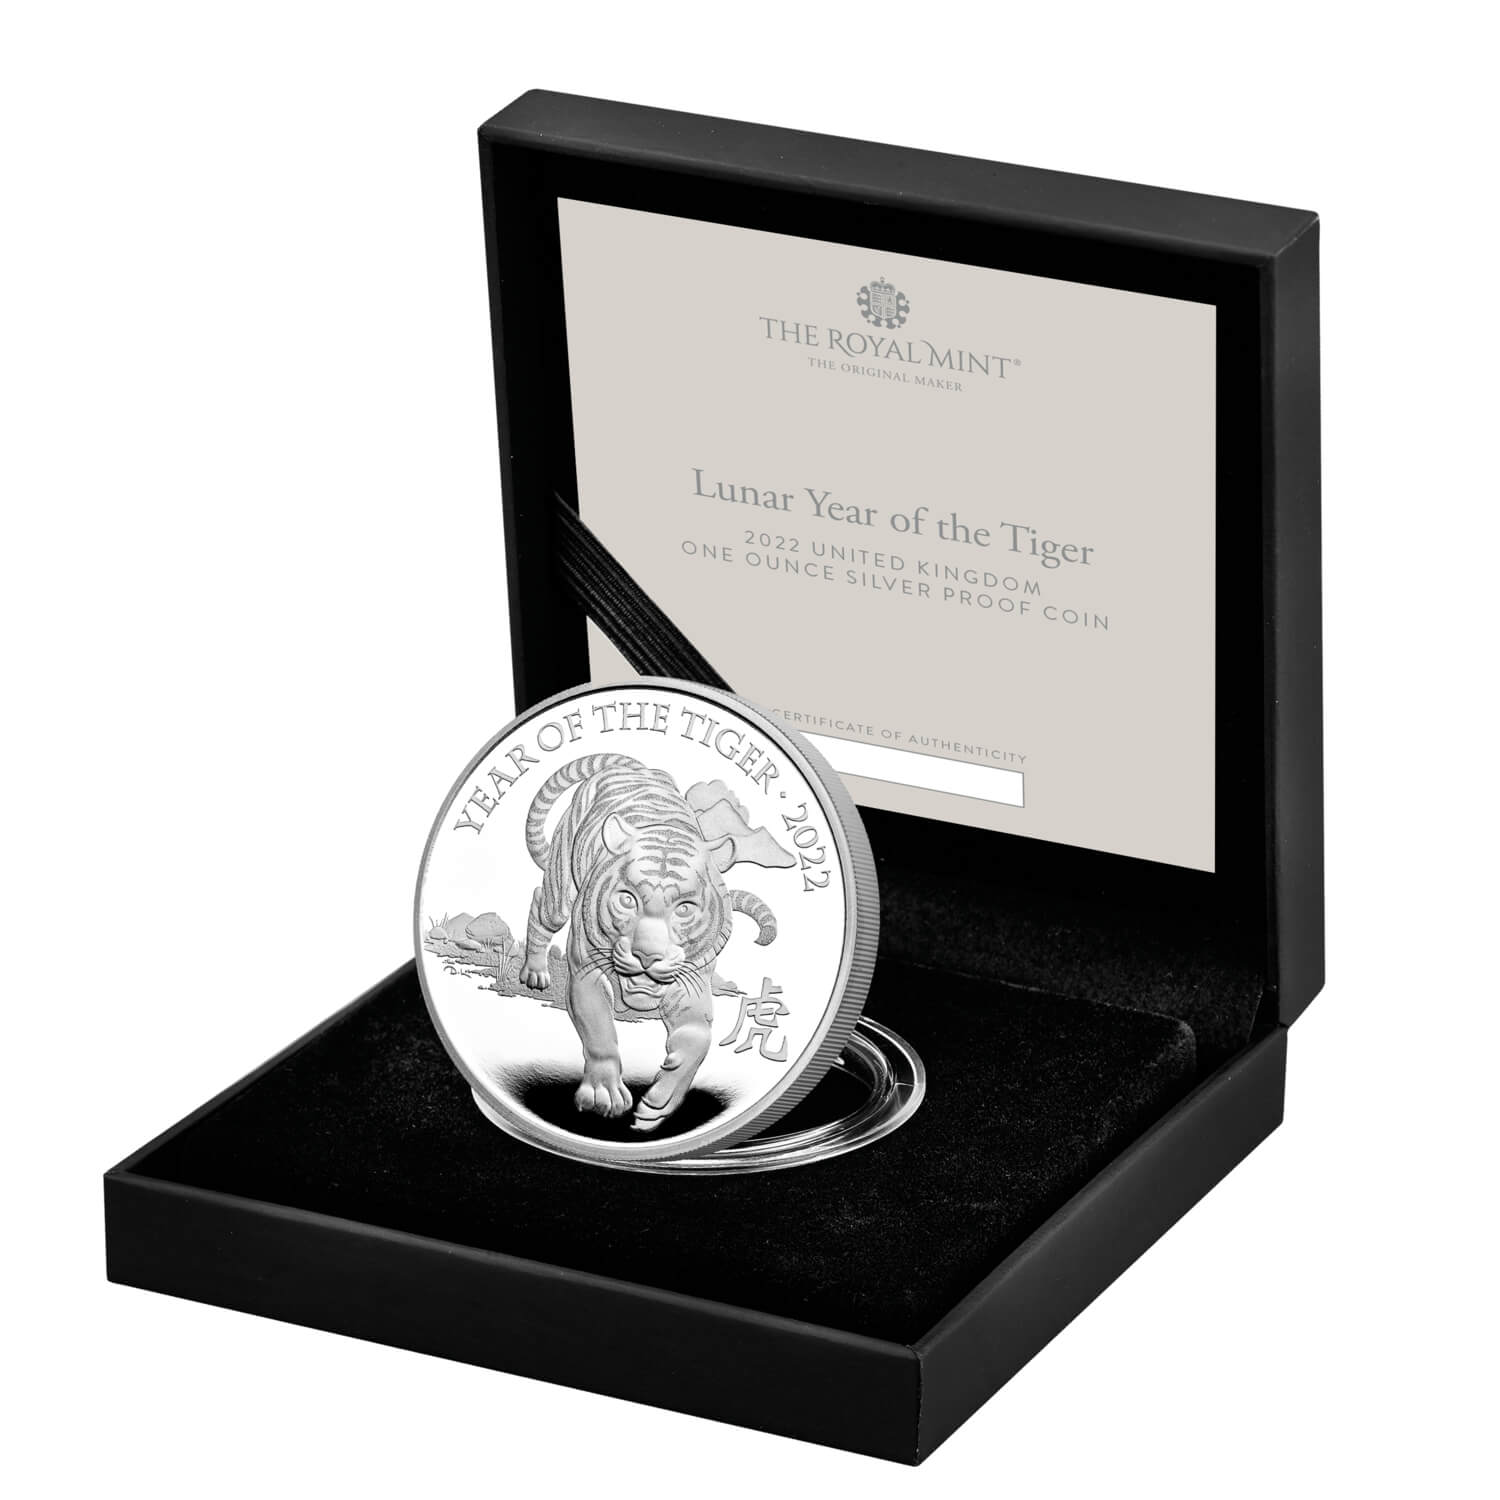 Lunar Year of the Tiger 2022 United Kingdom One Ounce Silver Proof Coin